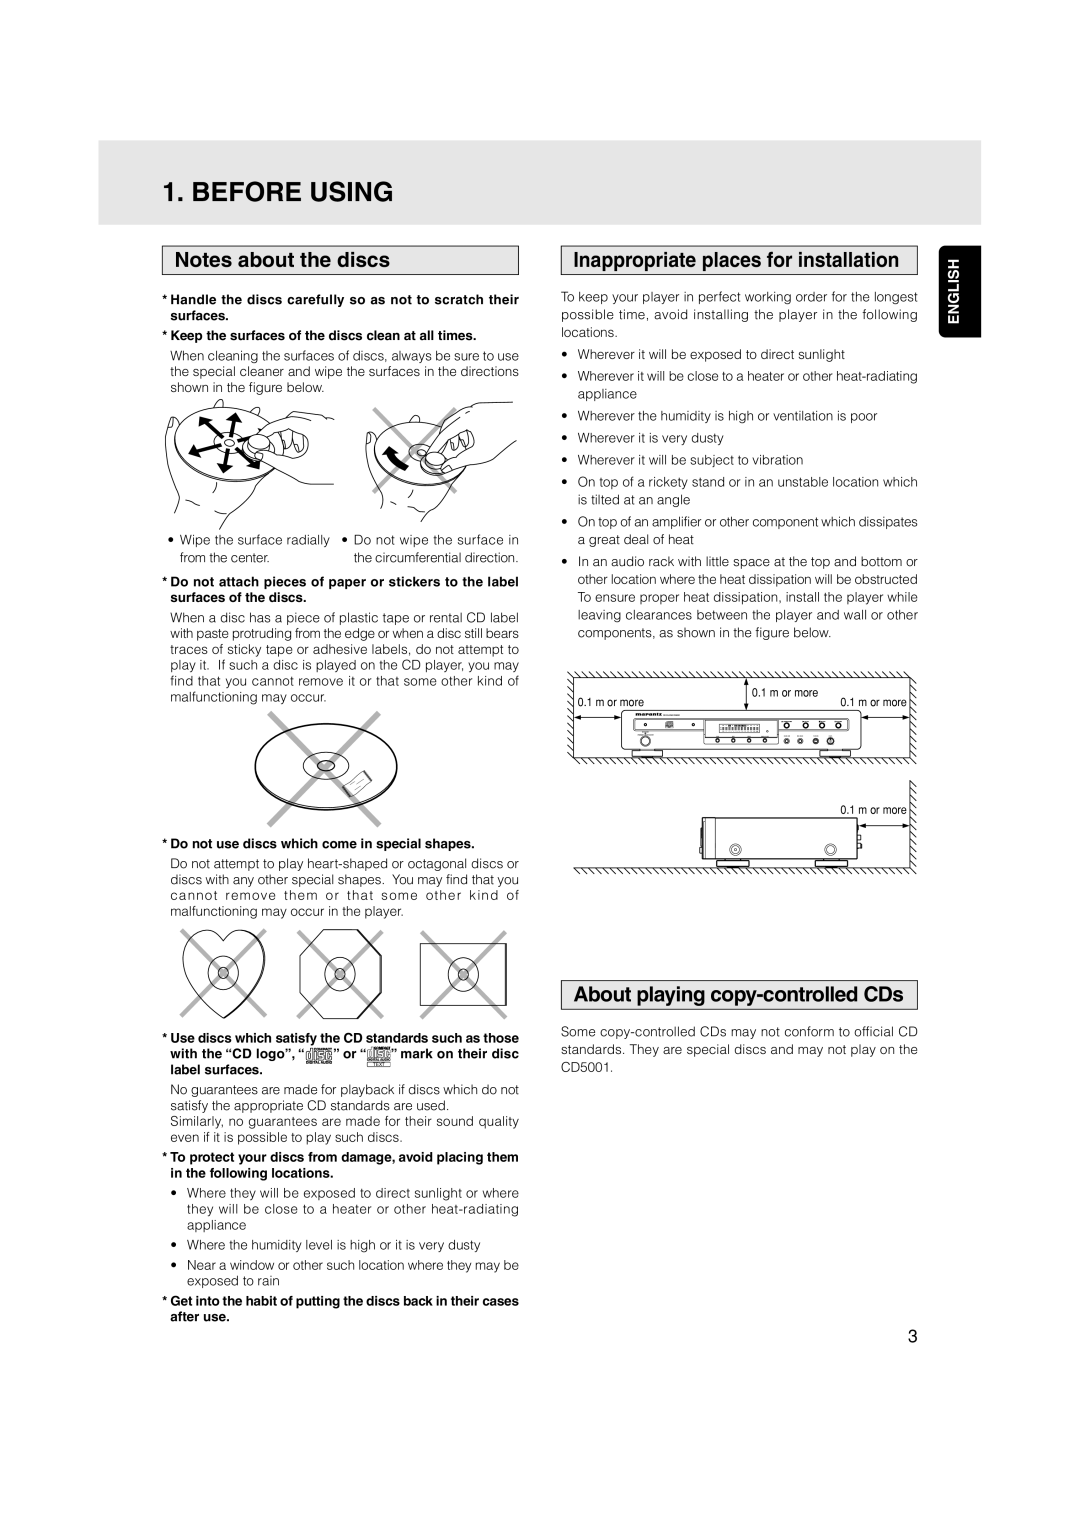 Marantz CD5001 manual Before Using, Notes about the discs, Inappropriate places for installation, English, label surfaces 